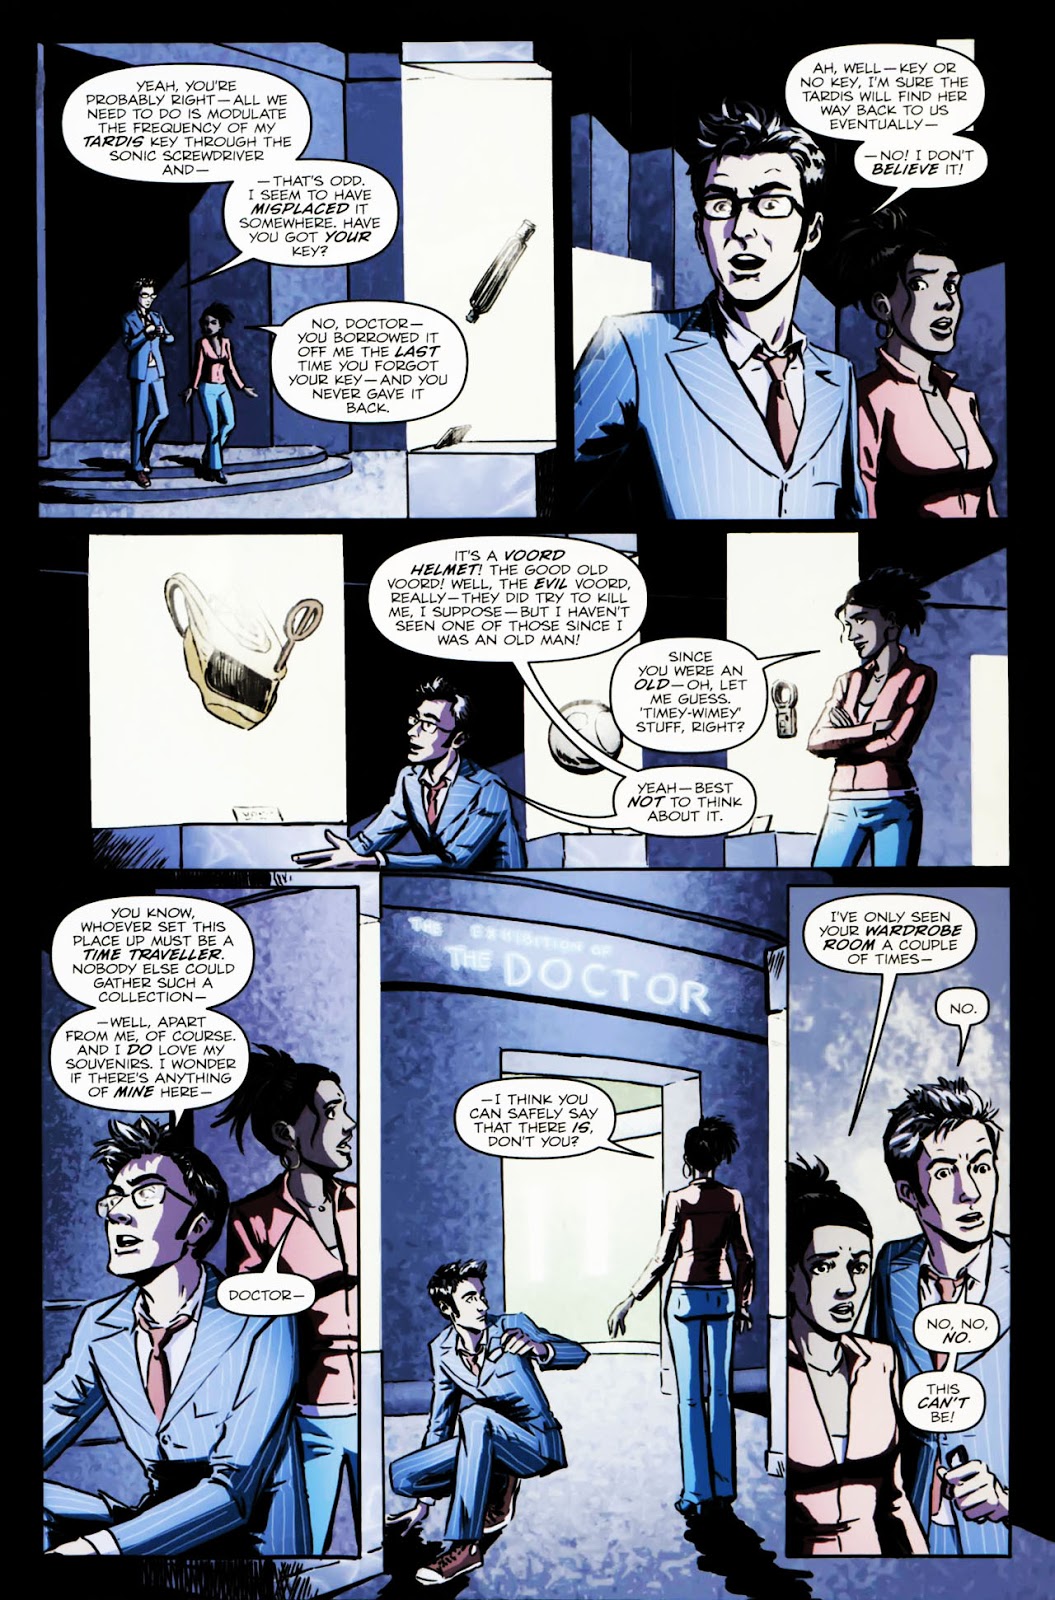 Doctor Who: The Forgotten issue 1 - Page 6